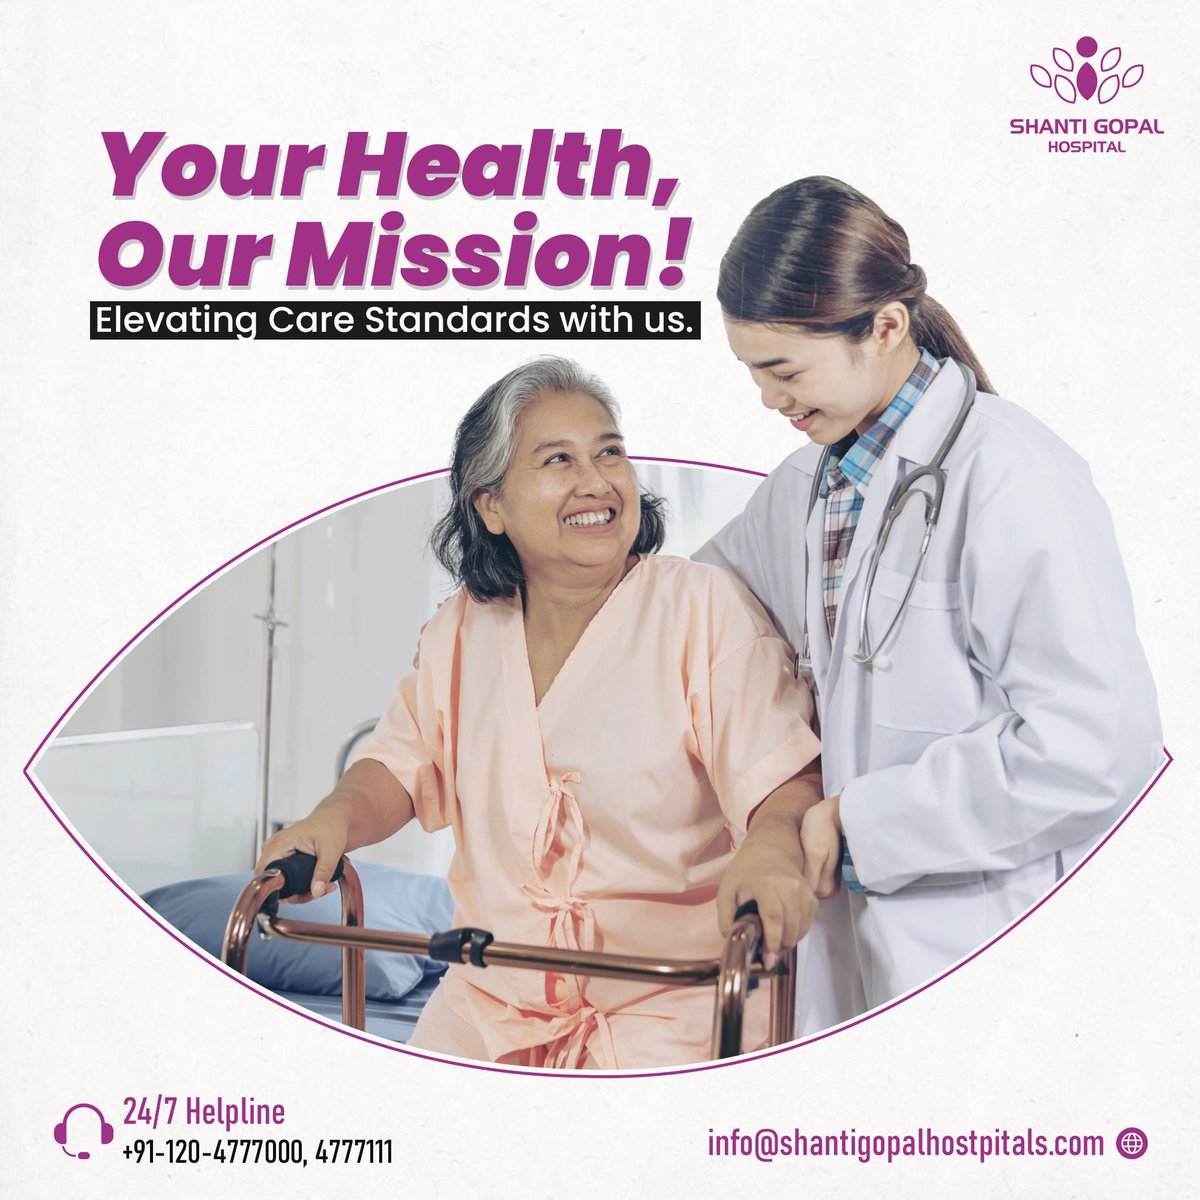 With a commitment to excellence, we stand at the forefront of healthcare, dedicated to elevating care  standards and prioritizing your well-being above all else. 
.
#shantigopalhospital #hospitals #hospital #hospitalservices #hospitalsncr #servicehospital #healthcare